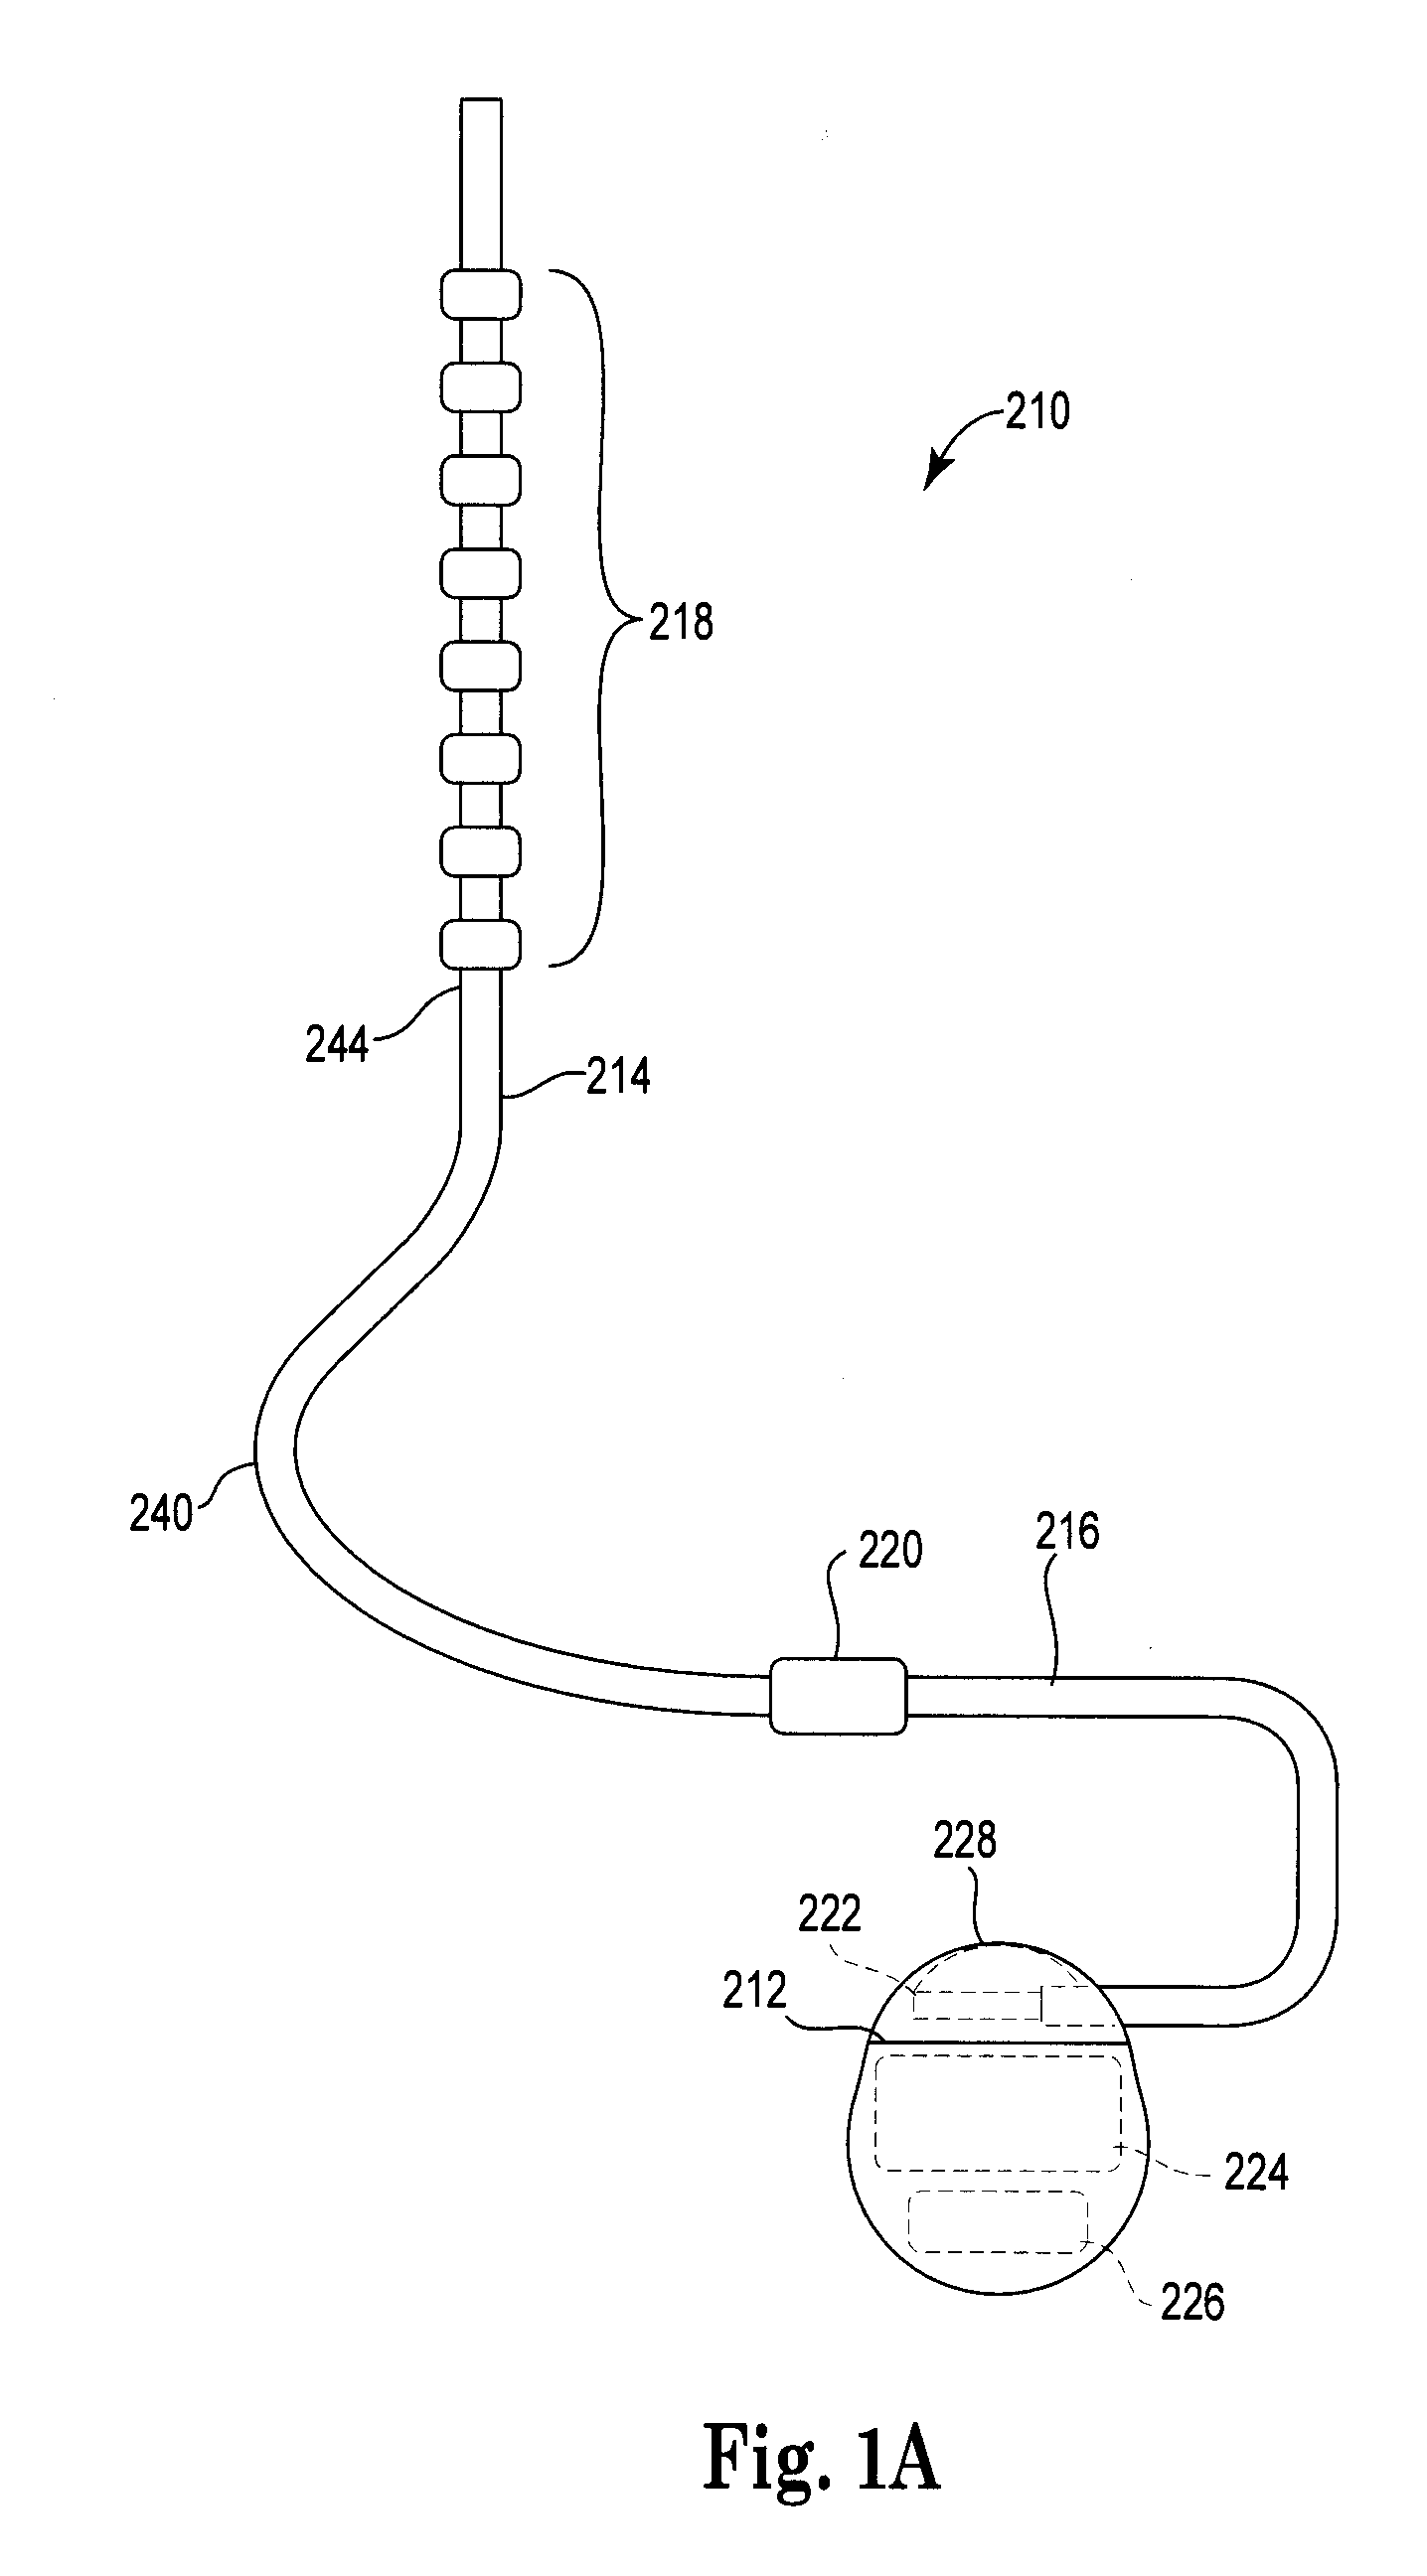 Pre-sutured anchor for implantable leads